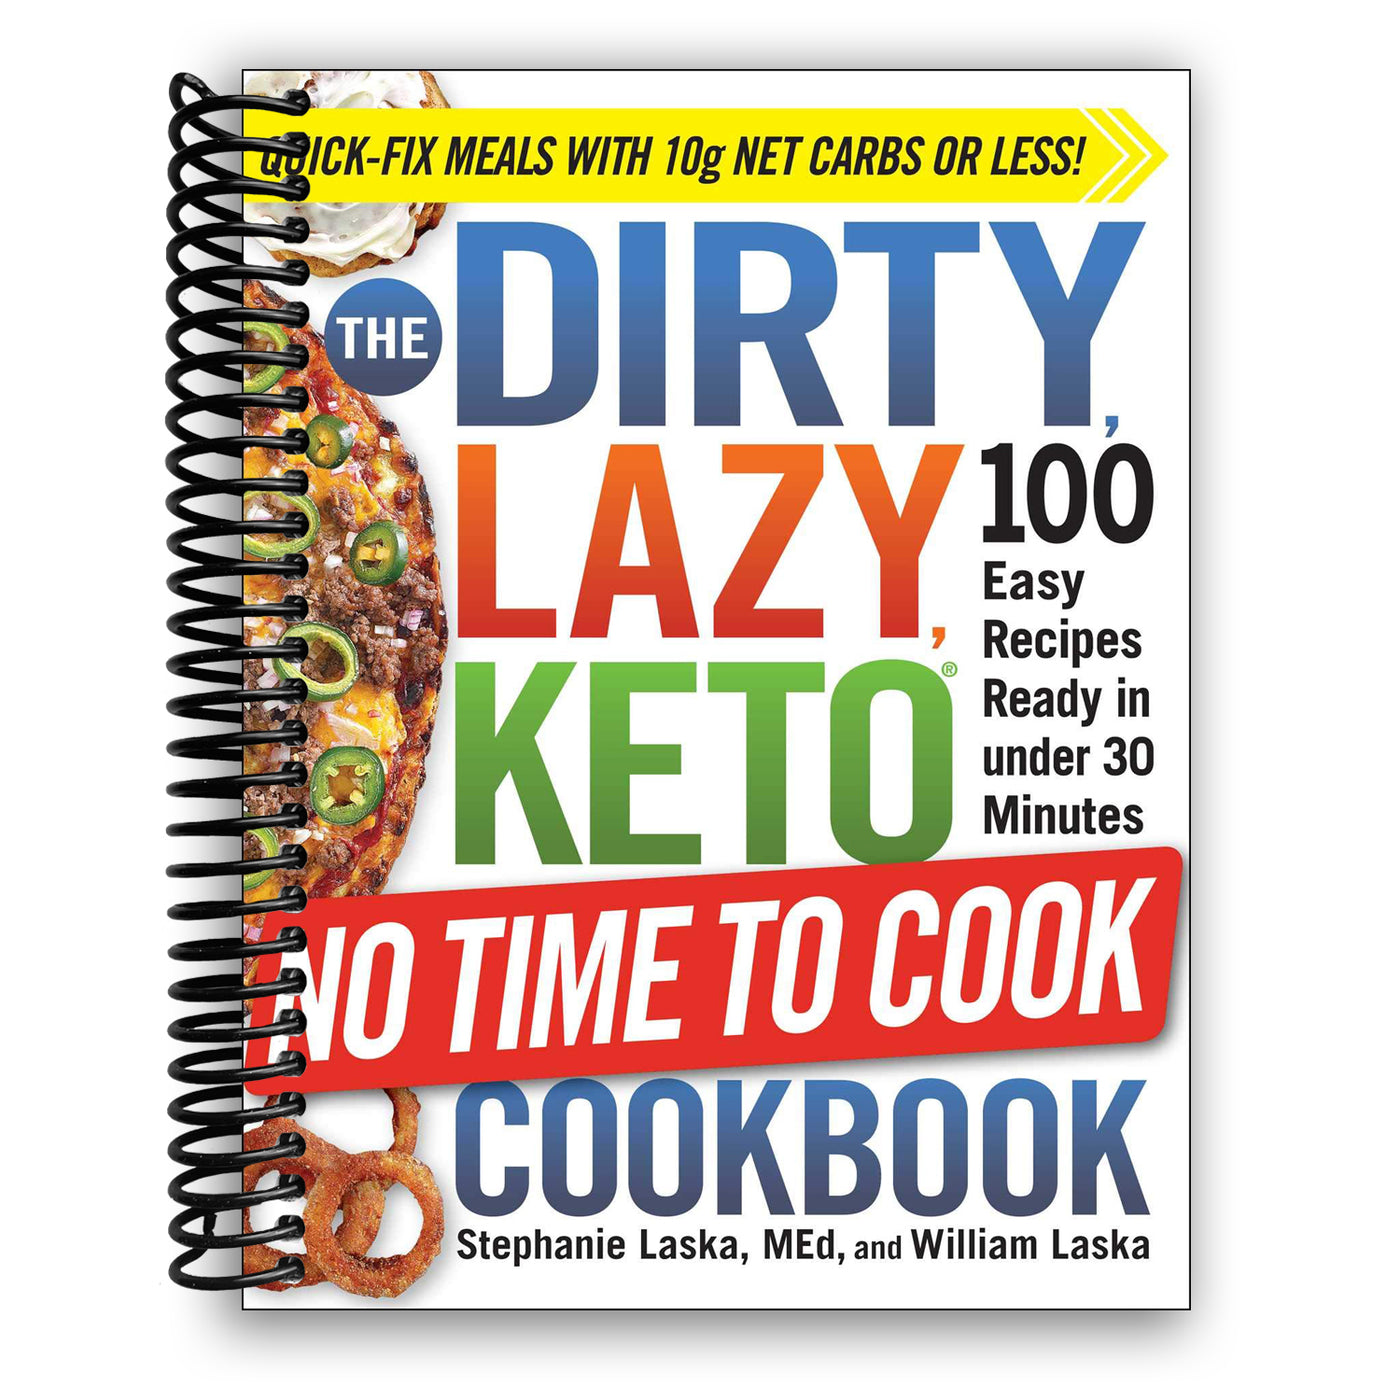 The DIRTY, LAZY, KETO No Time to Cook Cookbook: 100 Easy Recipes Ready in under 30 Minutes (Spiral Bound)